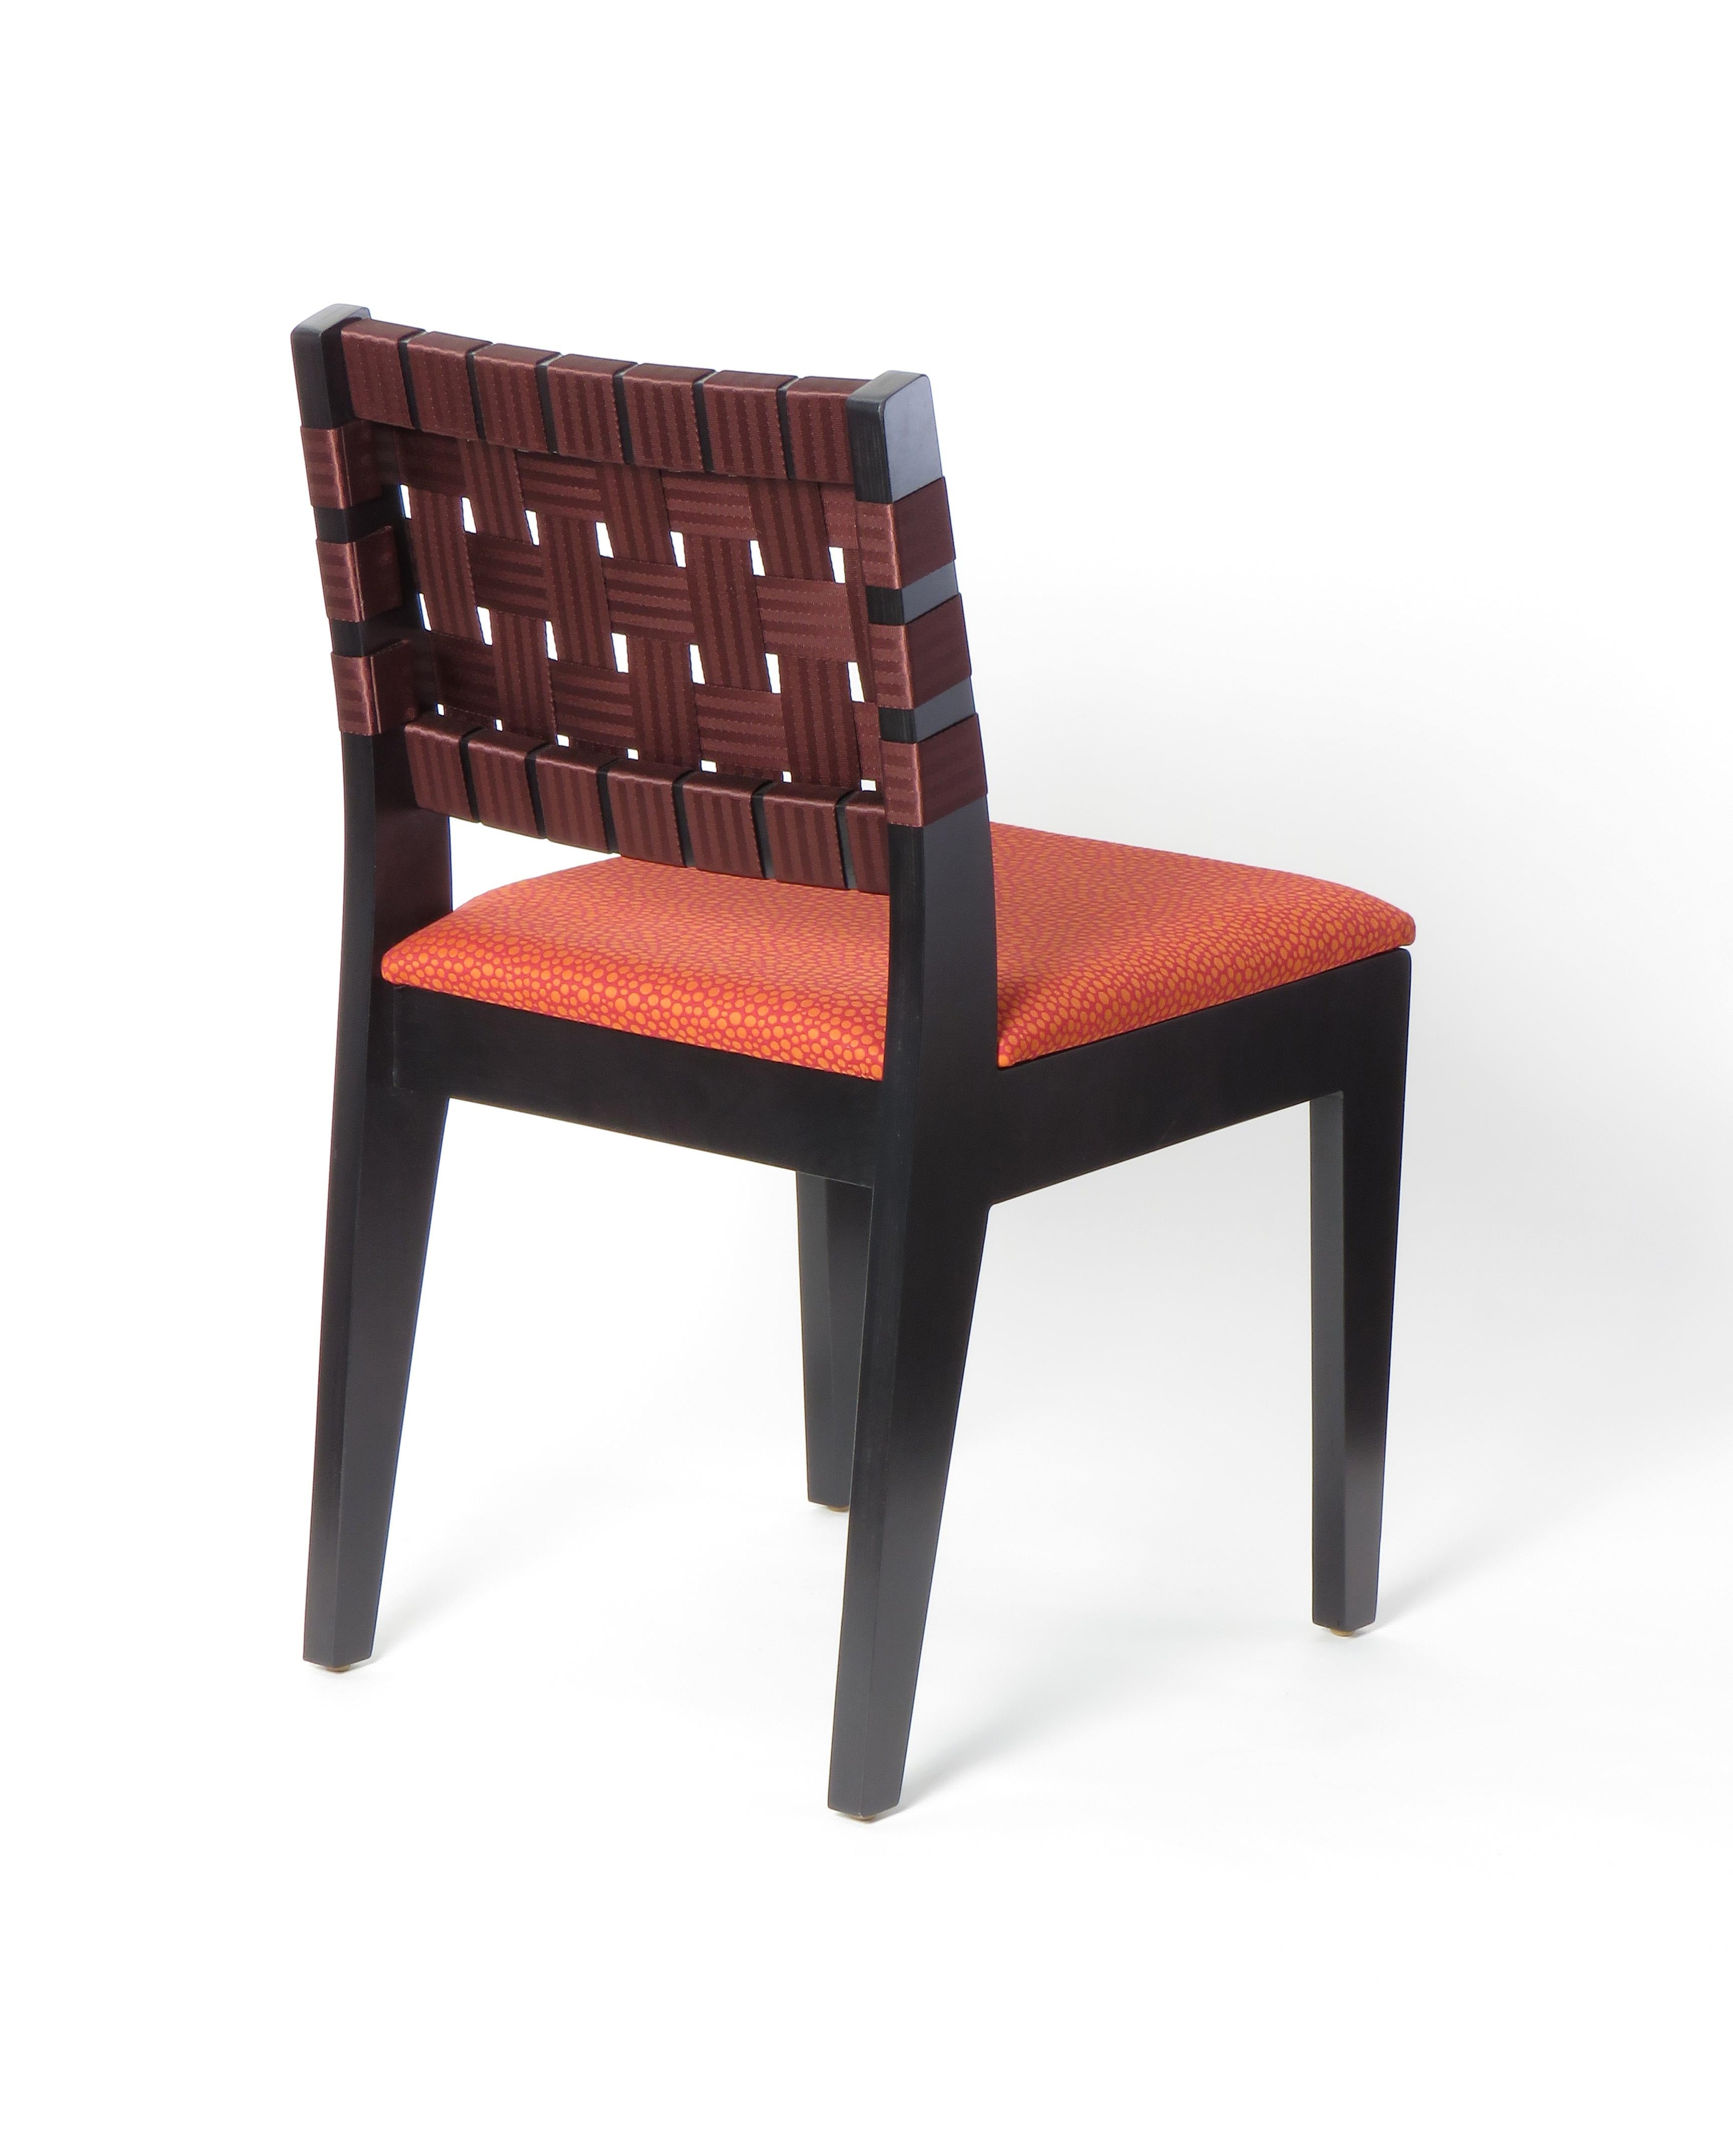 Maple Side Chair In Wenge with Champagne Woven Seat & Back by Peter Danko For Sale 1